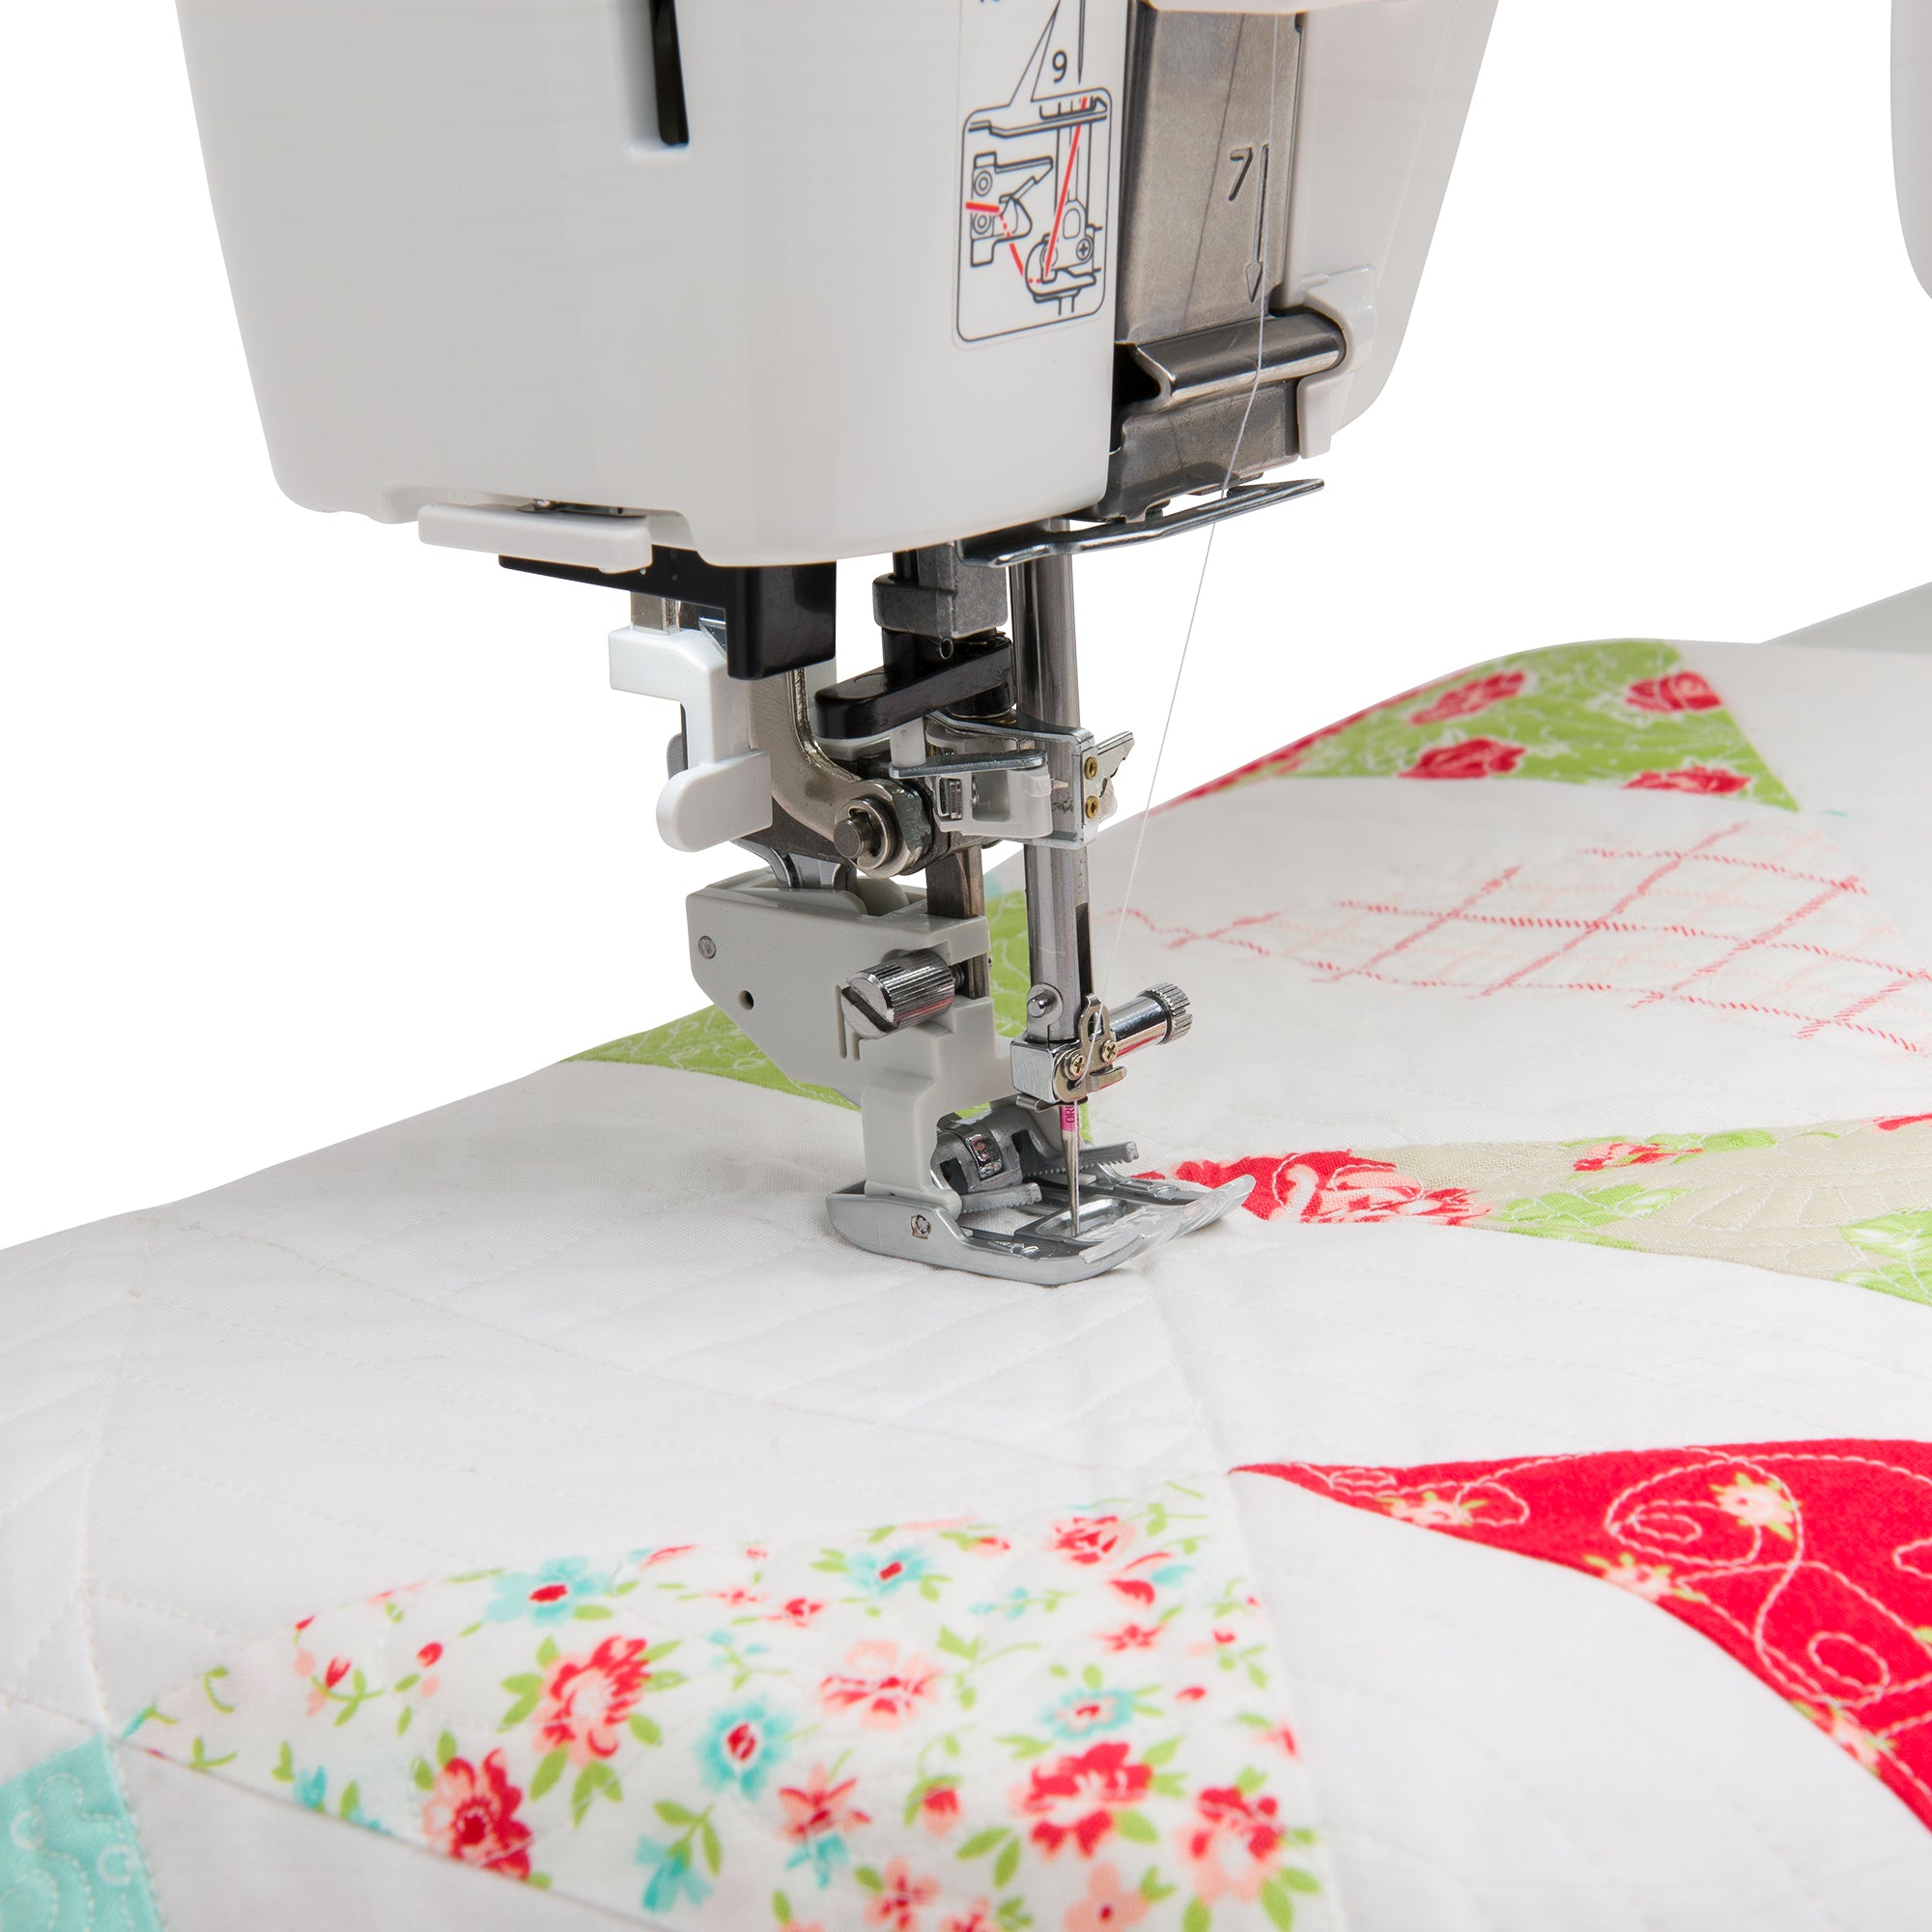 Janome Continental M7 Sewing and Quilting Machine for Sale at World Weidner